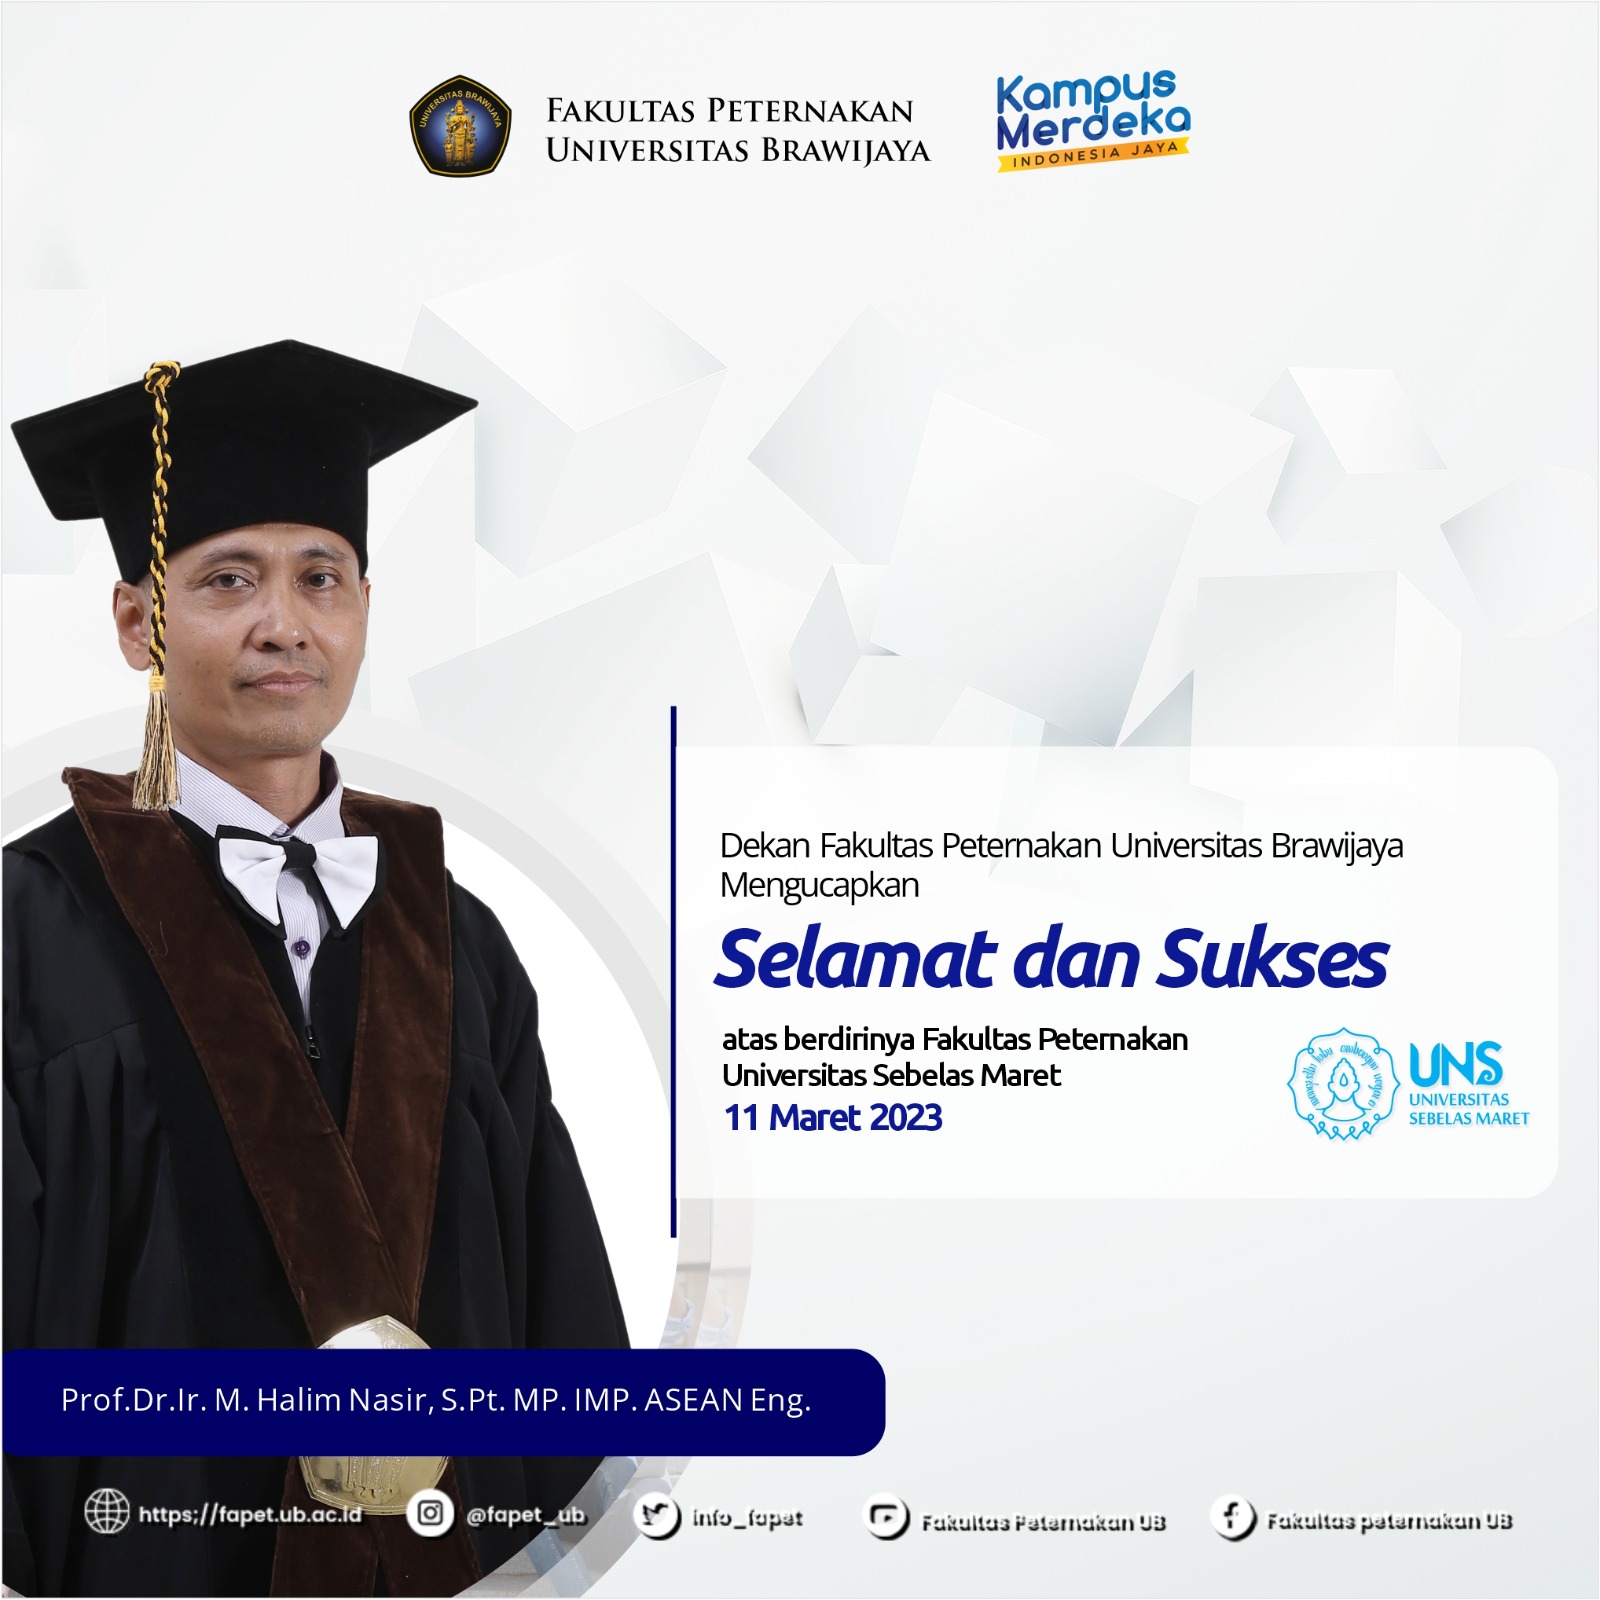 Congratulations and Success to the Faculty of Animal Husbandry, Sebelas Maret University